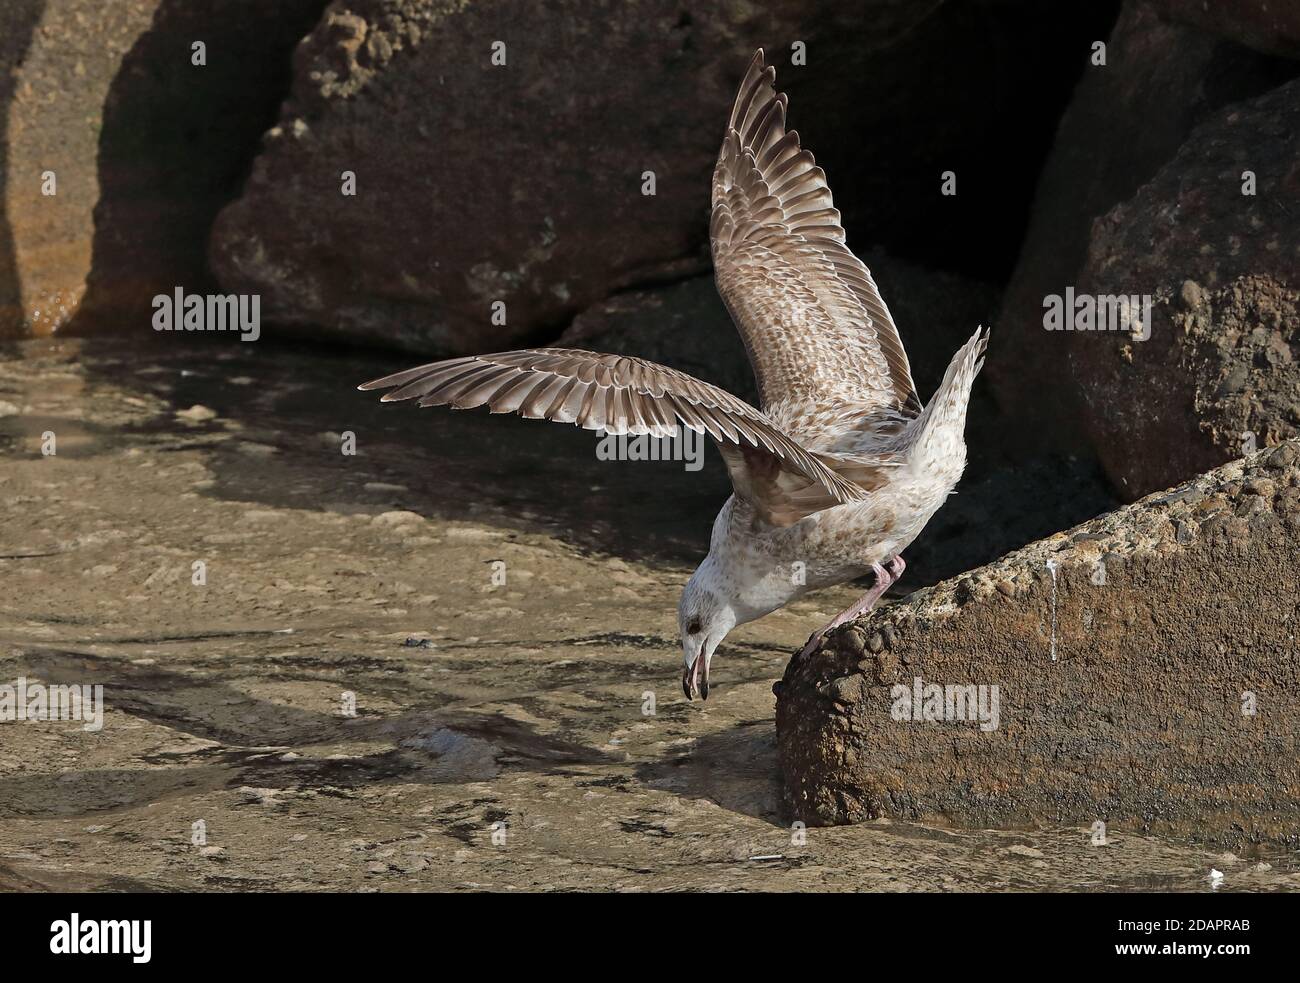 Slaty-backed Gull (Larus schistisagus) first winter standing on rock, feeding on outflow from fish processing plant Choshi, Chiba Prefecture, Japan Stock Photo